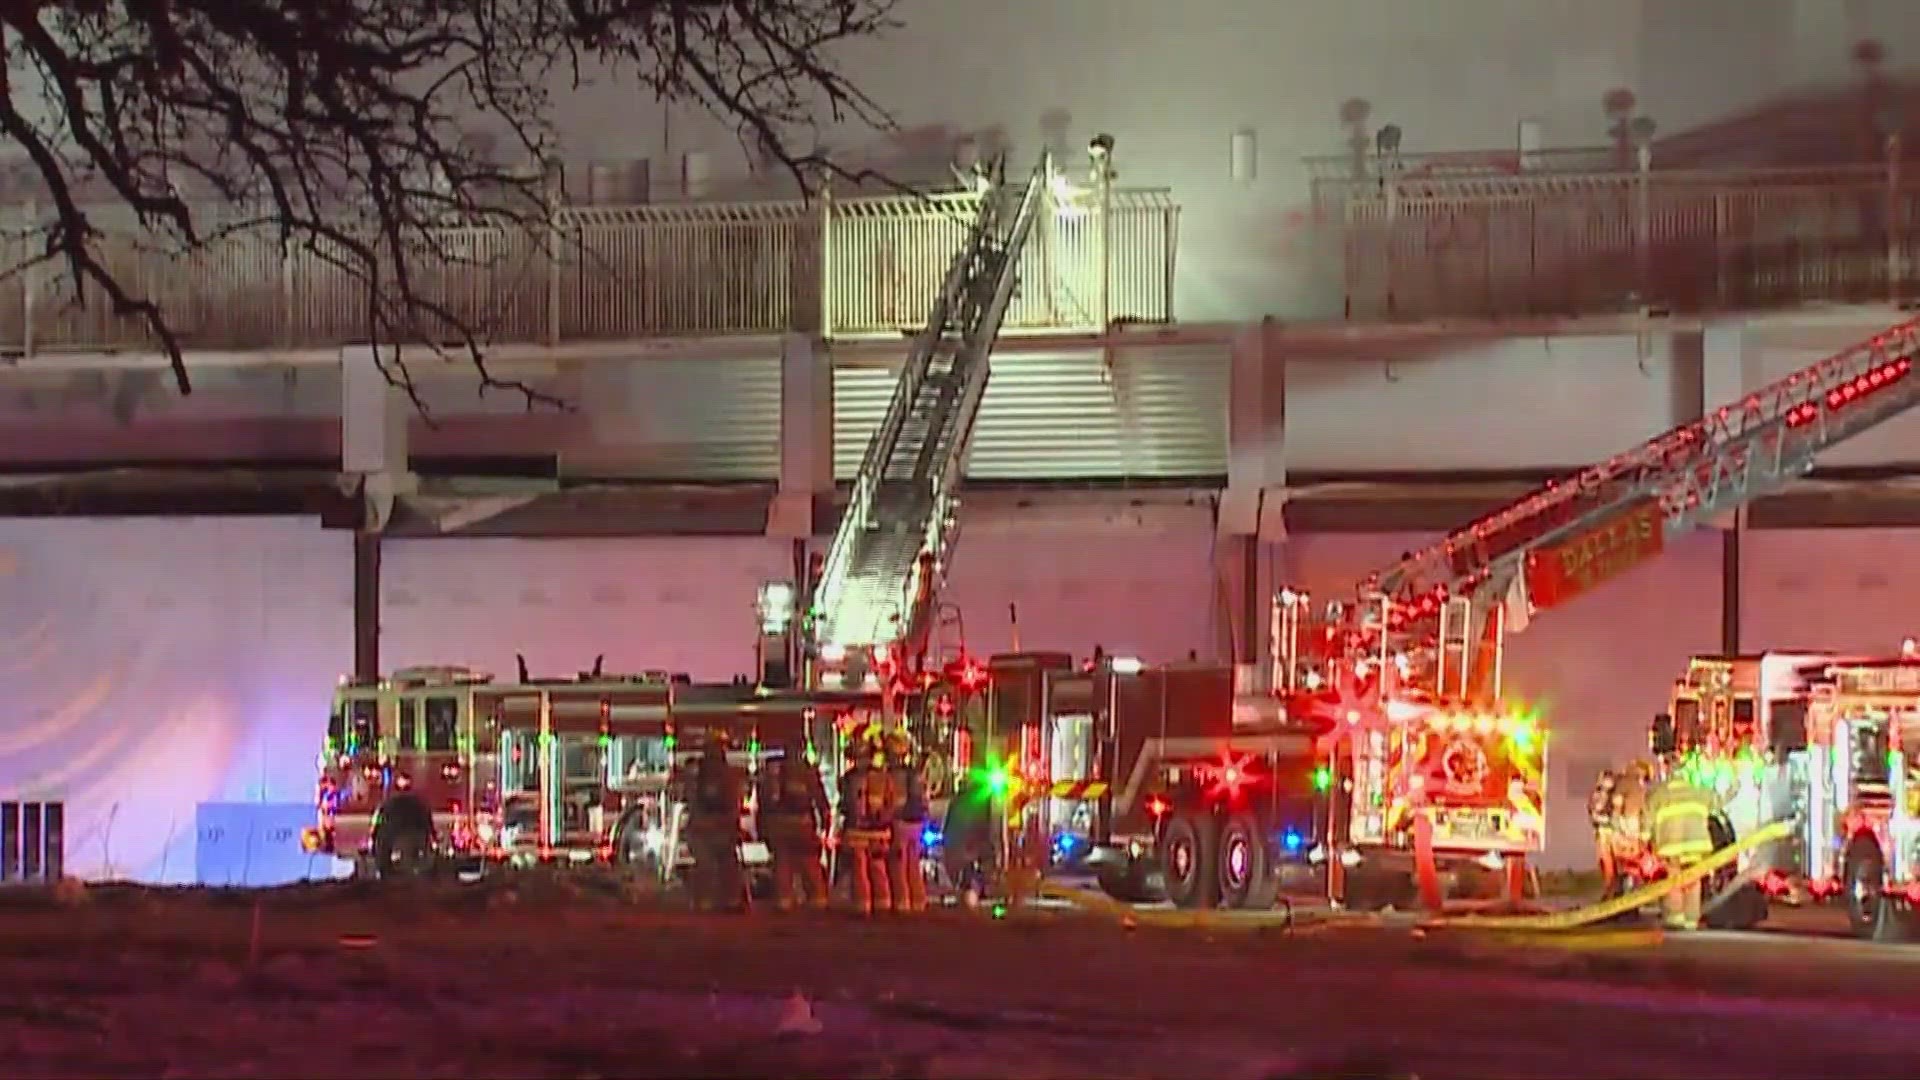 Firefighters responded to the fire just after 4 a.m. Thursday.